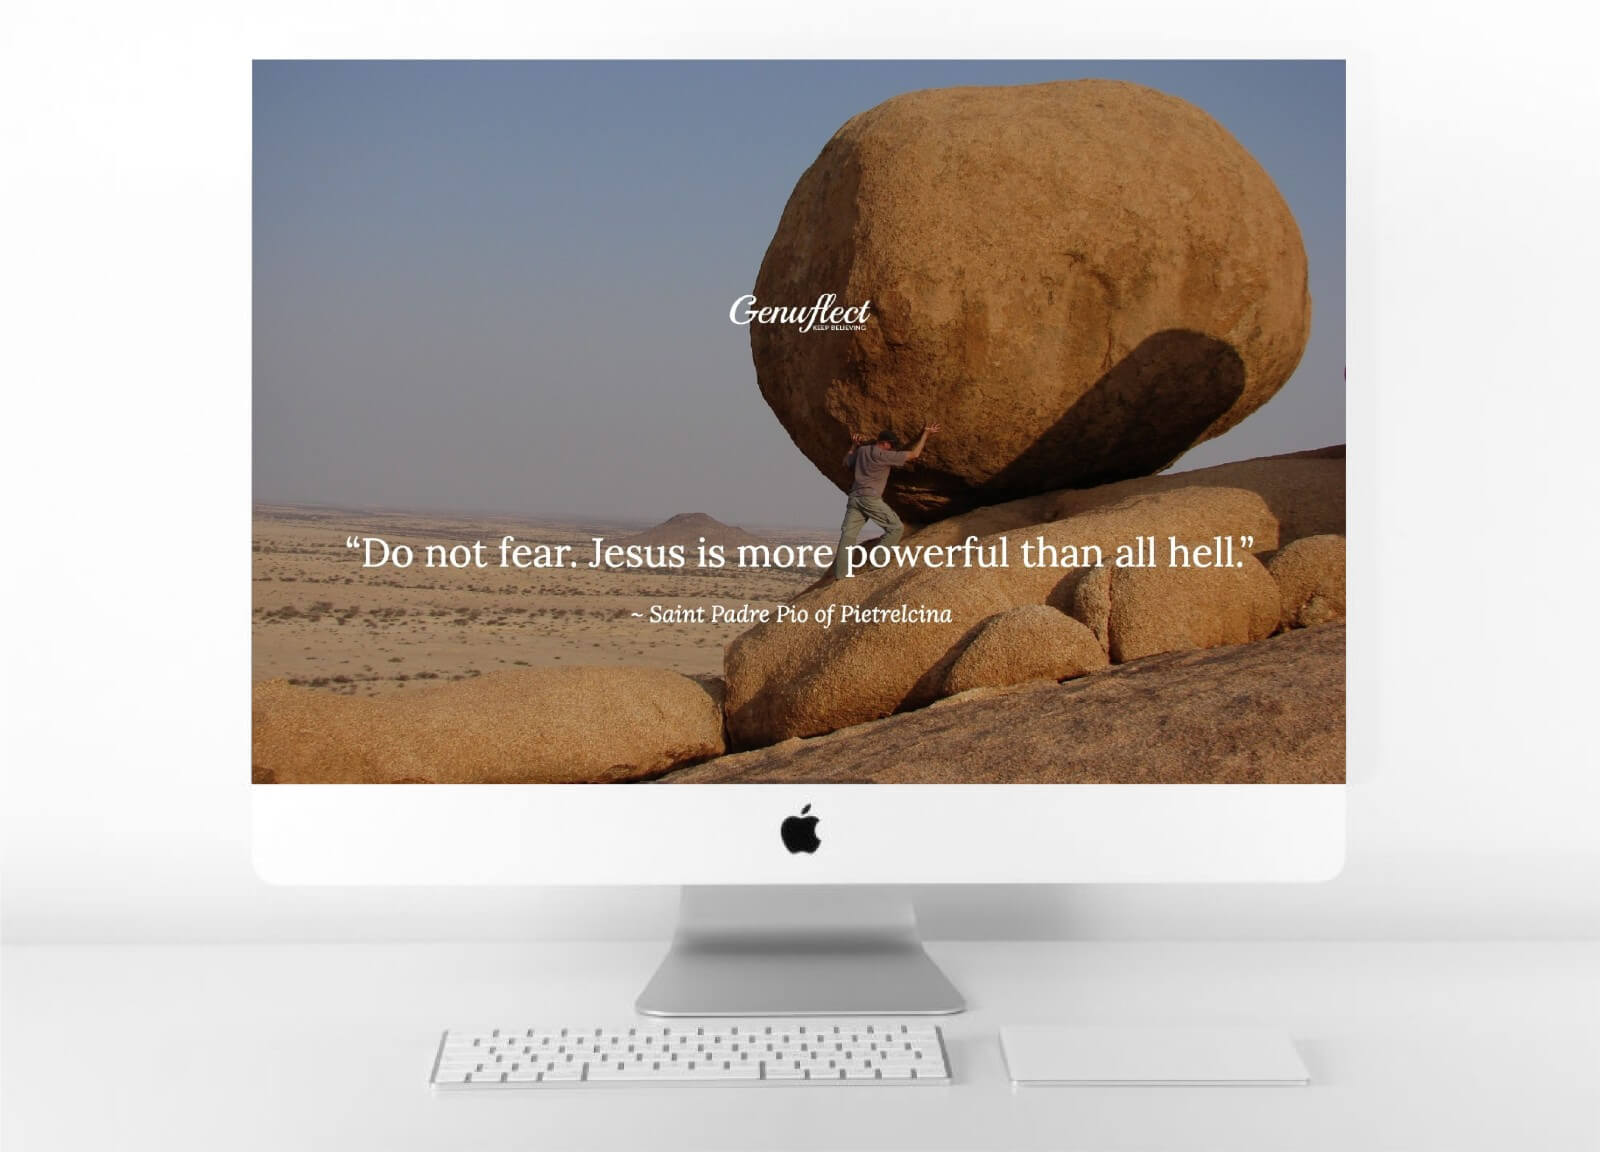 Genuflect computer background image of a A man posing as if holding up a large boulder